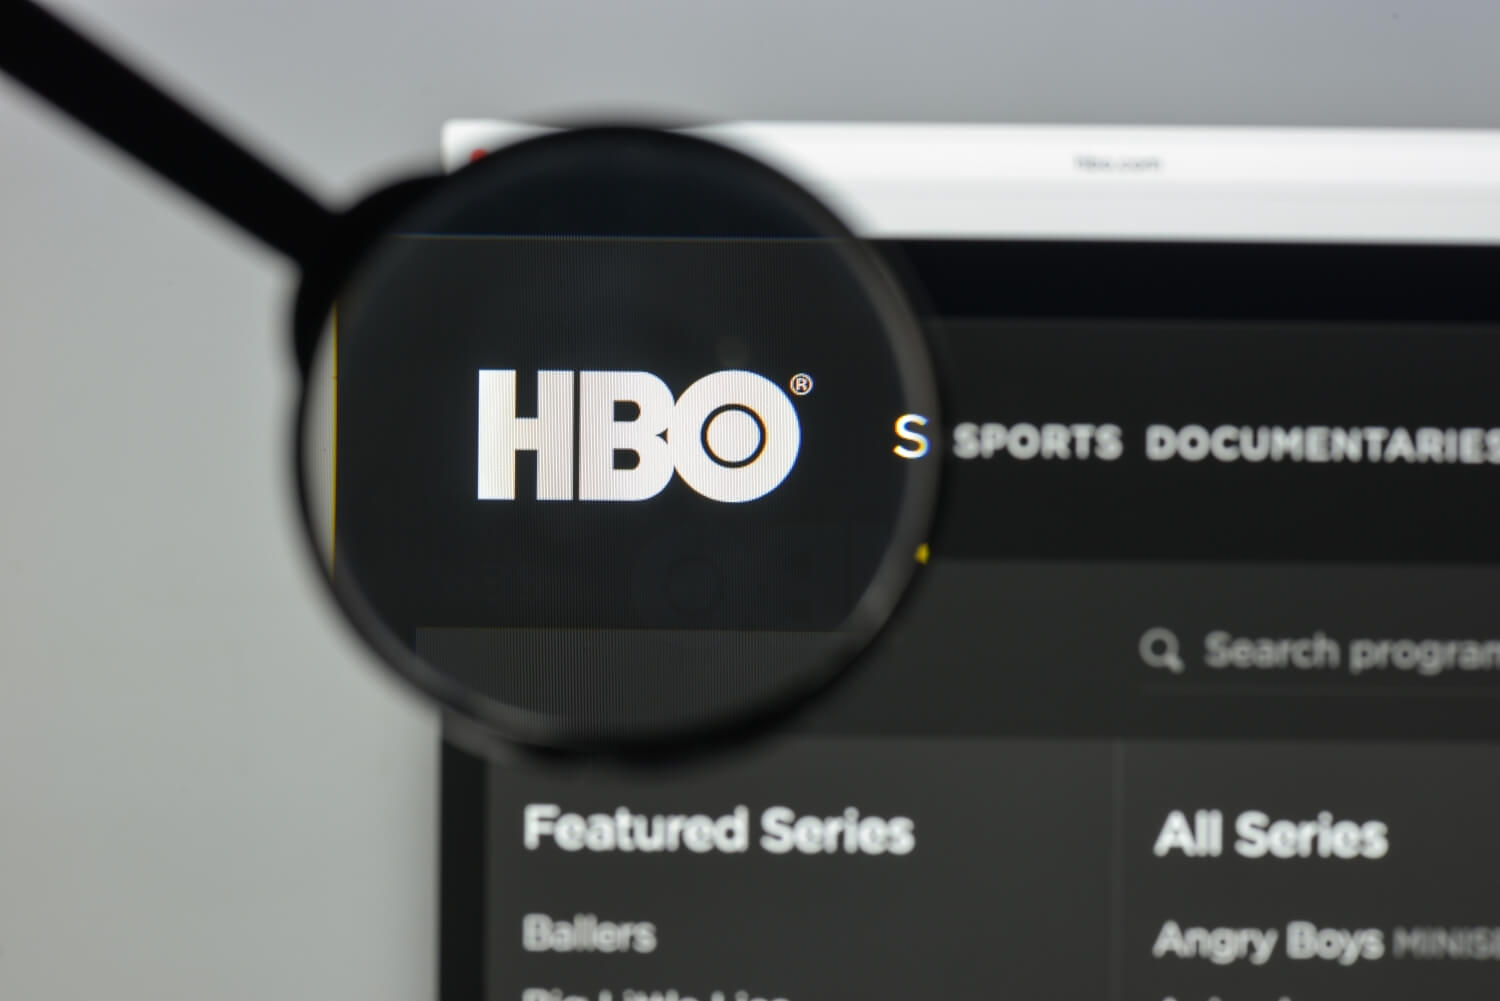 HBO is sunsetting HBO Go later this summer